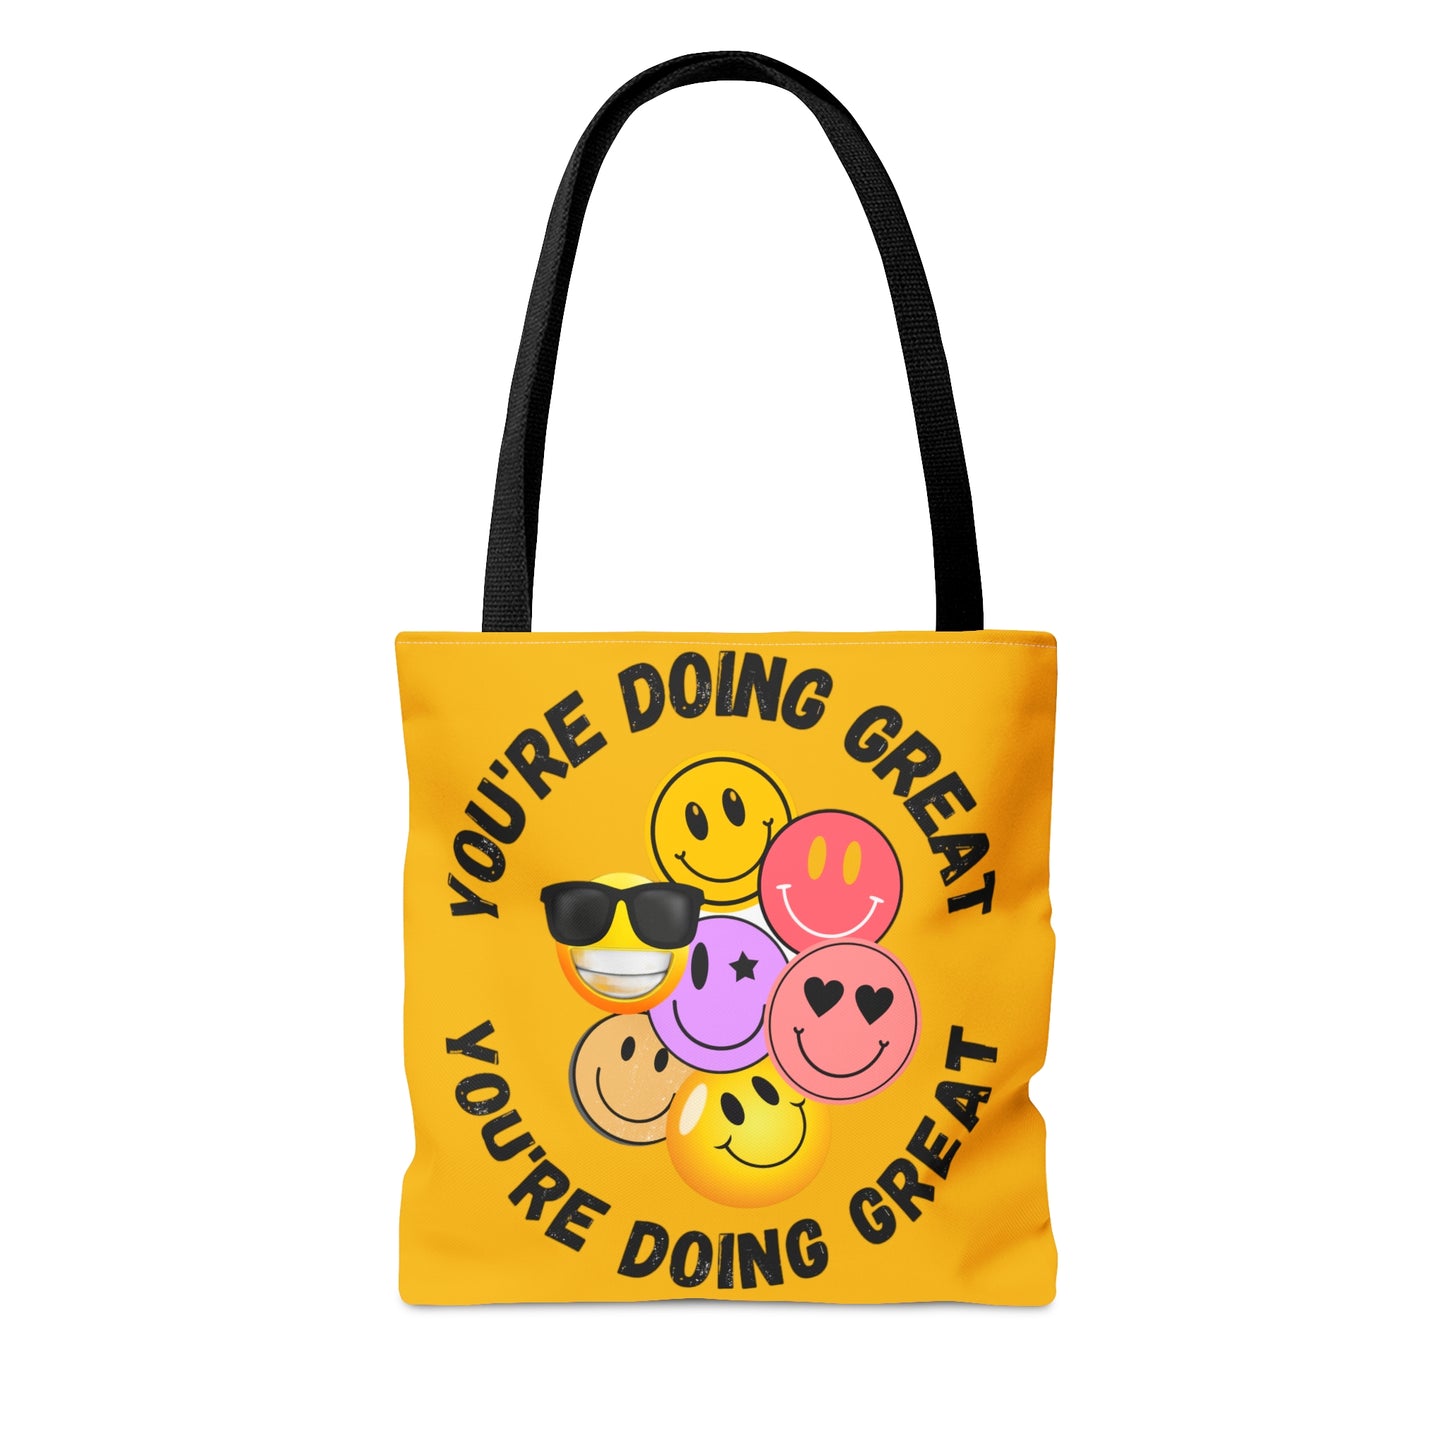 Positive feedback “YOU ARE DOING GREAT” makes us smile with this colorful Tote Bag in 3 sizes to meet your needs.